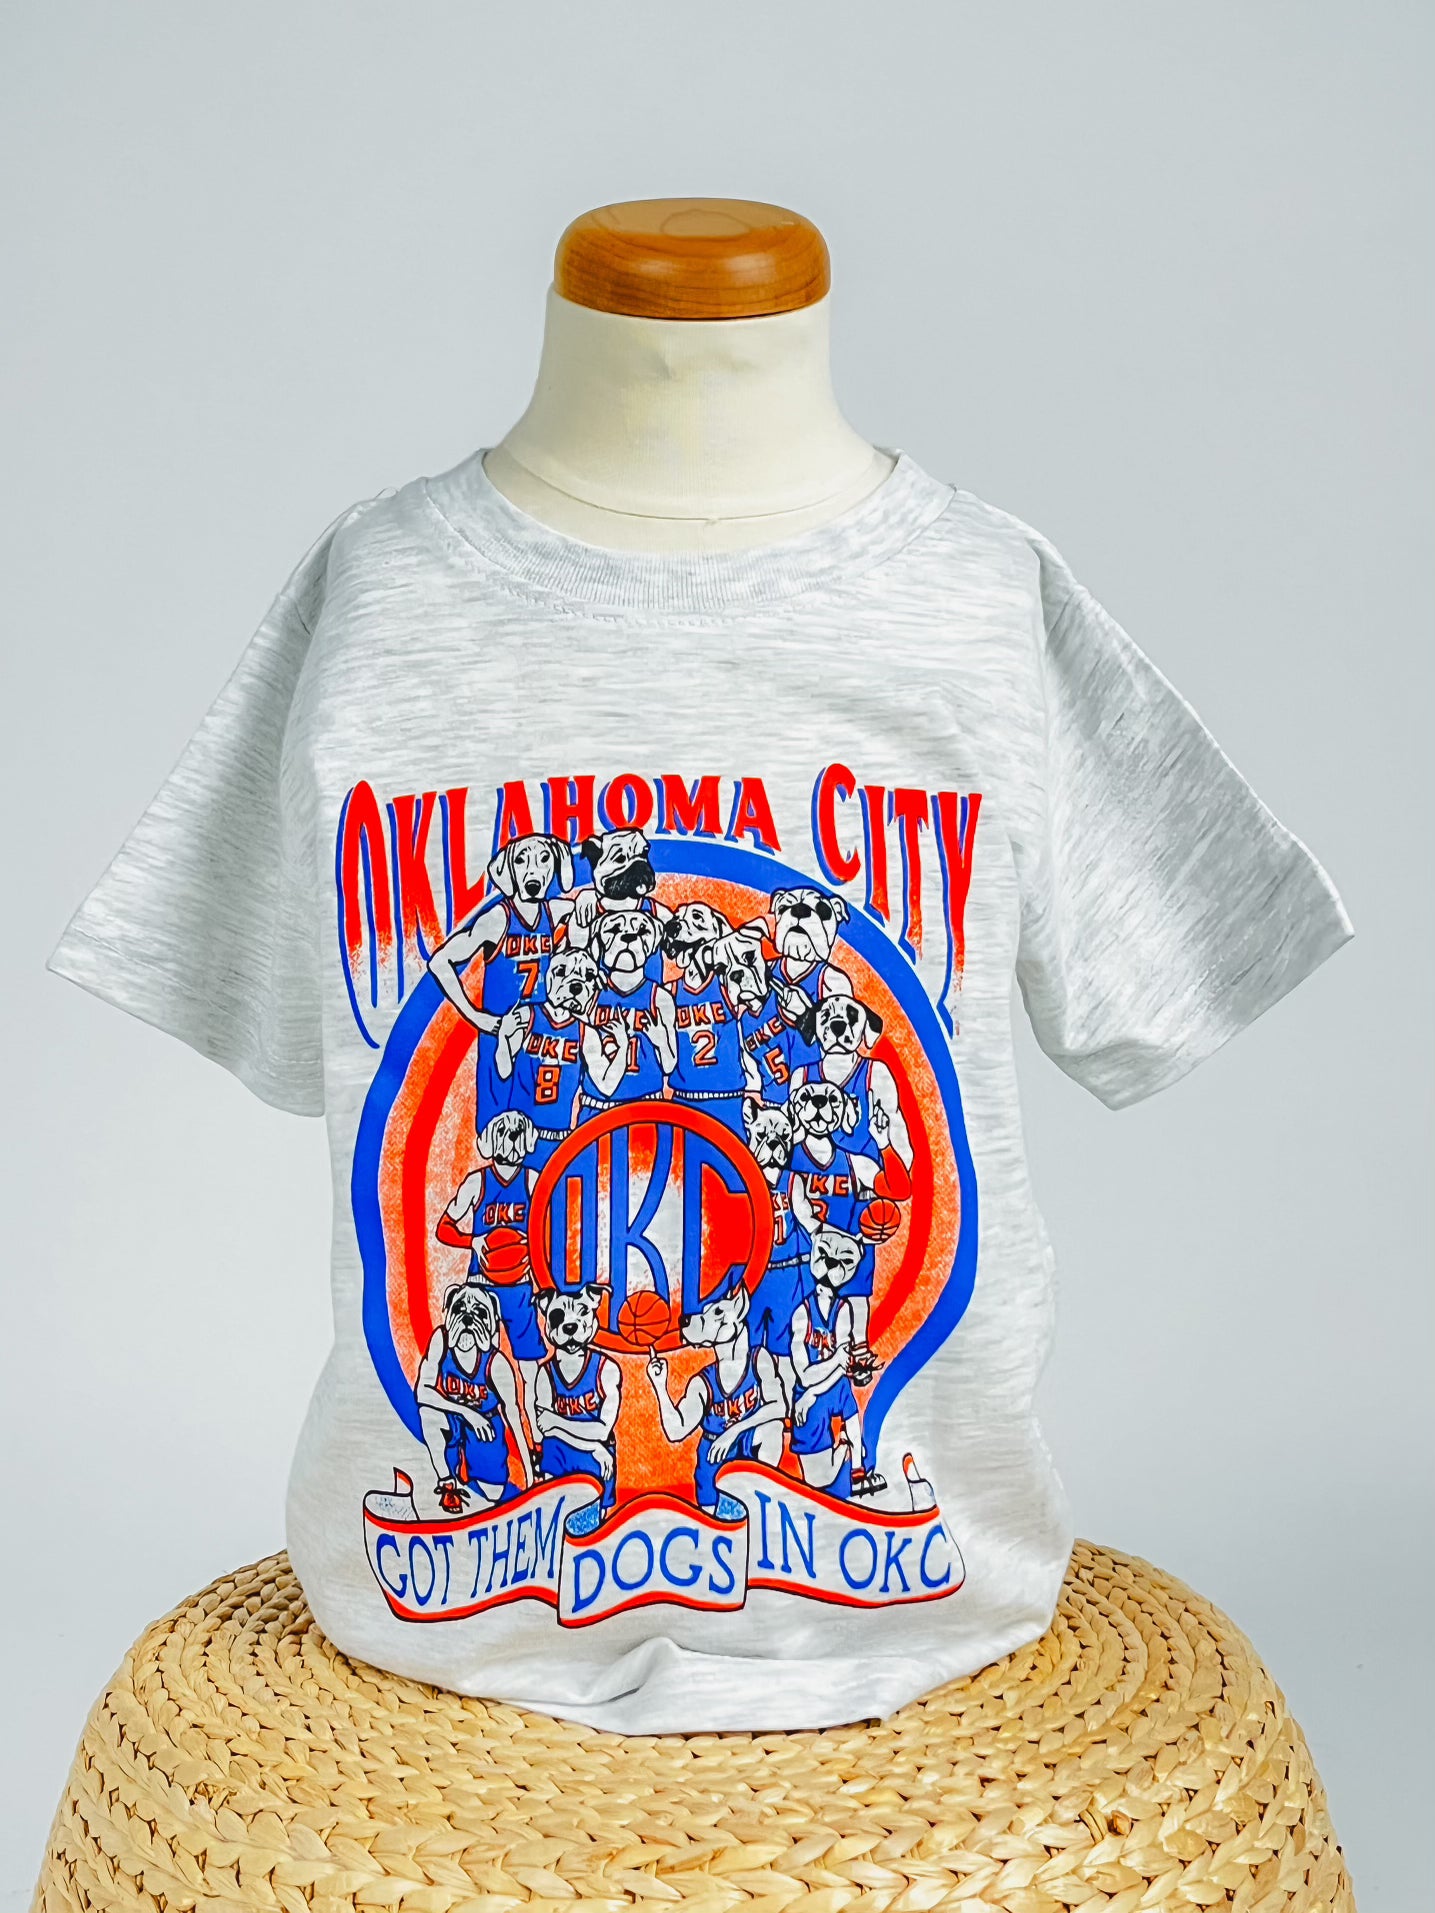 KIDS got them dogs in OKC basketball t-shirt ash - Trendy OKC Apparel at Lush Fashion Lounge Boutique in Oklahoma City